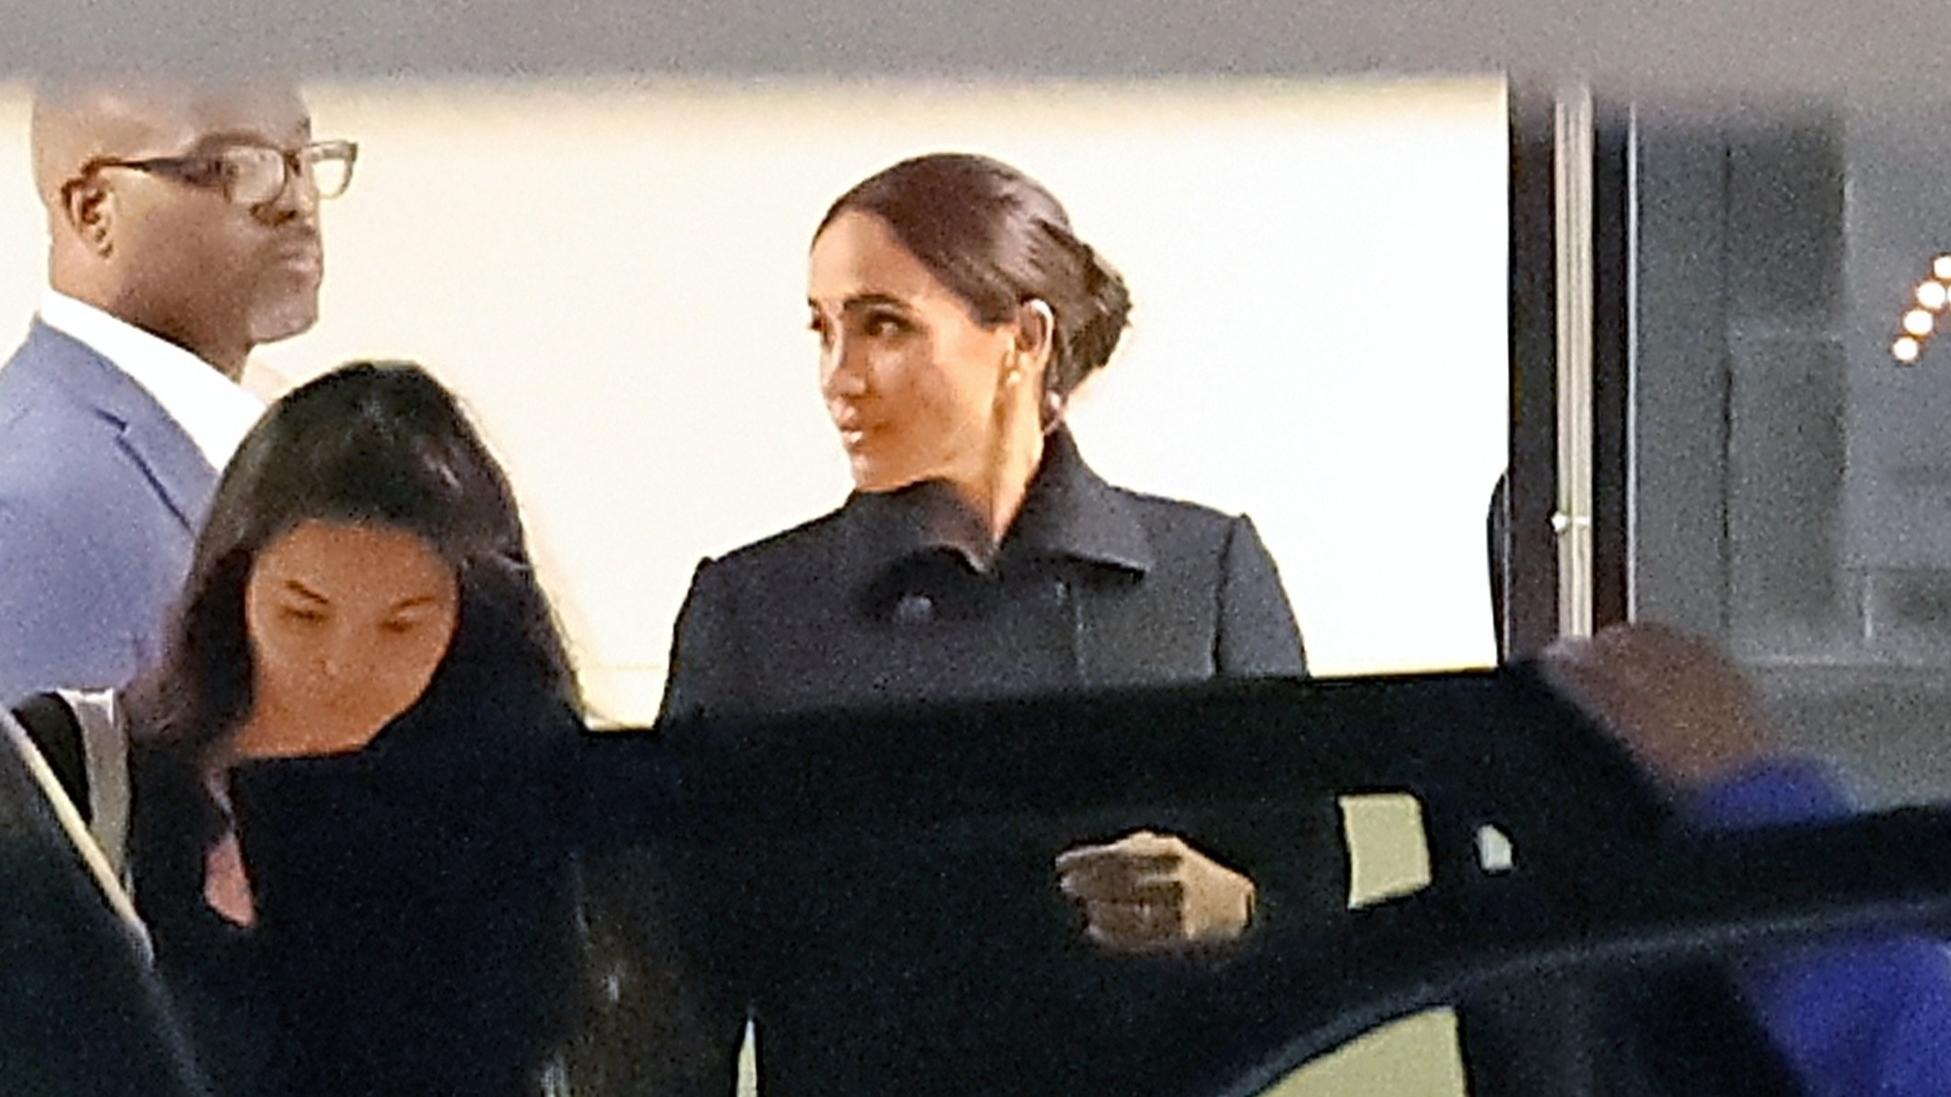 SONDERKONDITIONEN: MINDESTHONORAR: *EXCLUSIVE* Indianapolis, IN - Meghan Markle leaves from the Indianapolis Colts private team hanger on a jet after flying in for just three hours. The Duchess wore a black jacket and blue, turquoise-hemmed skirt and